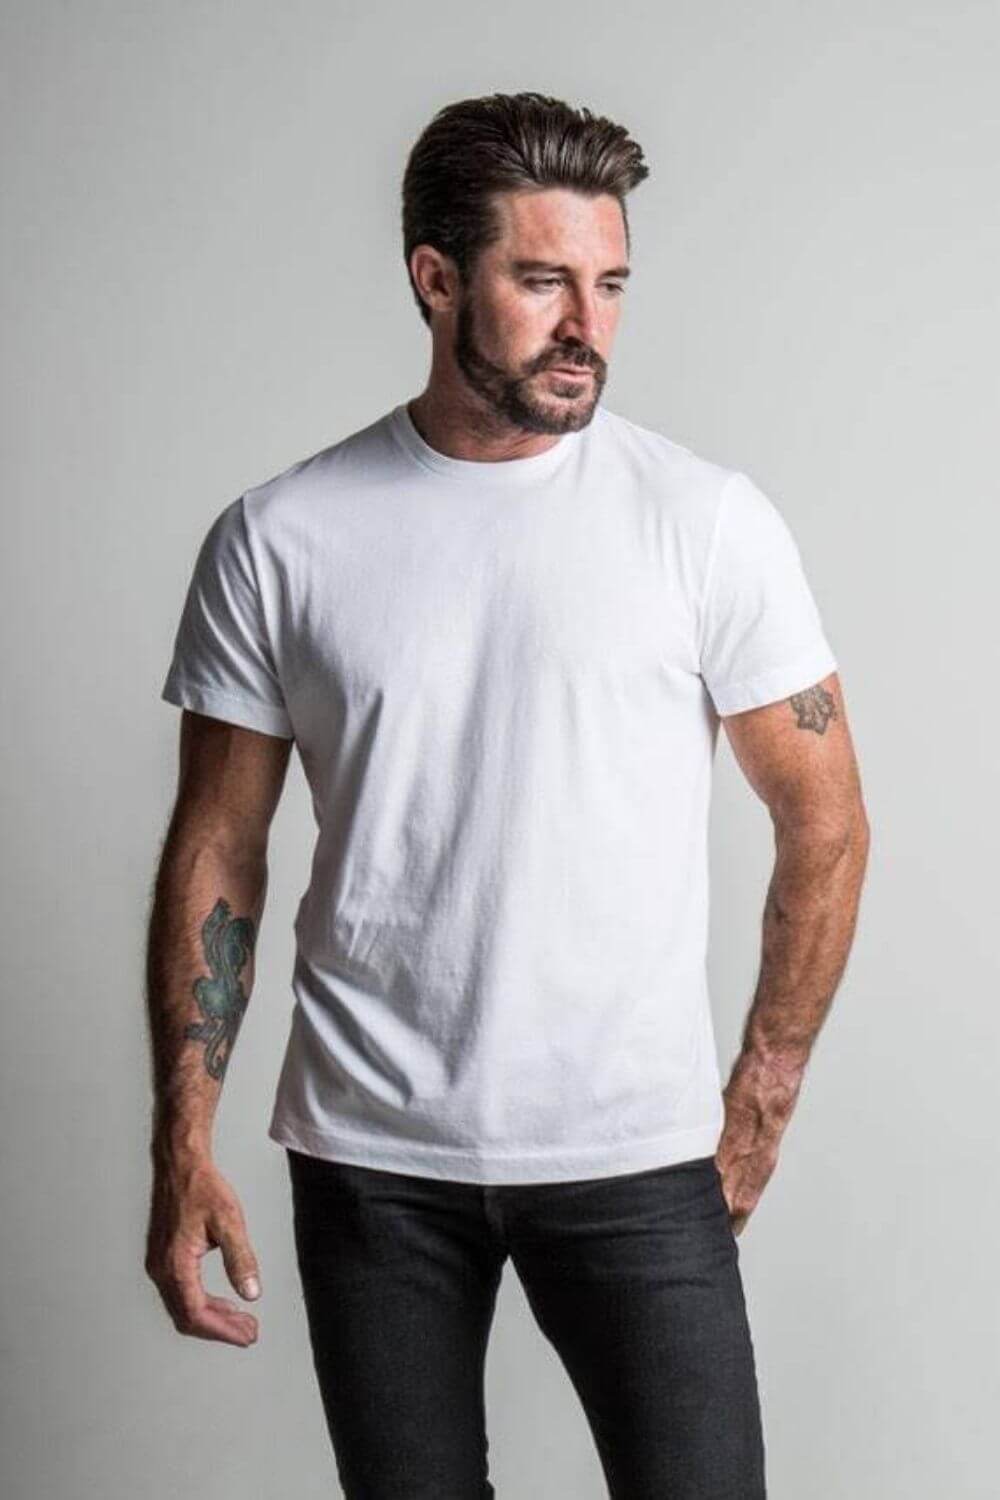 For many guys, just shopping can be enough torture without all the added pressure of working out where to get sustainable mens clothing. Here we’ve done the hard work for you... Image by The Classic T-Shirt Company #sustainablemensclothing #ethicalmensclothing #sustainablejungle